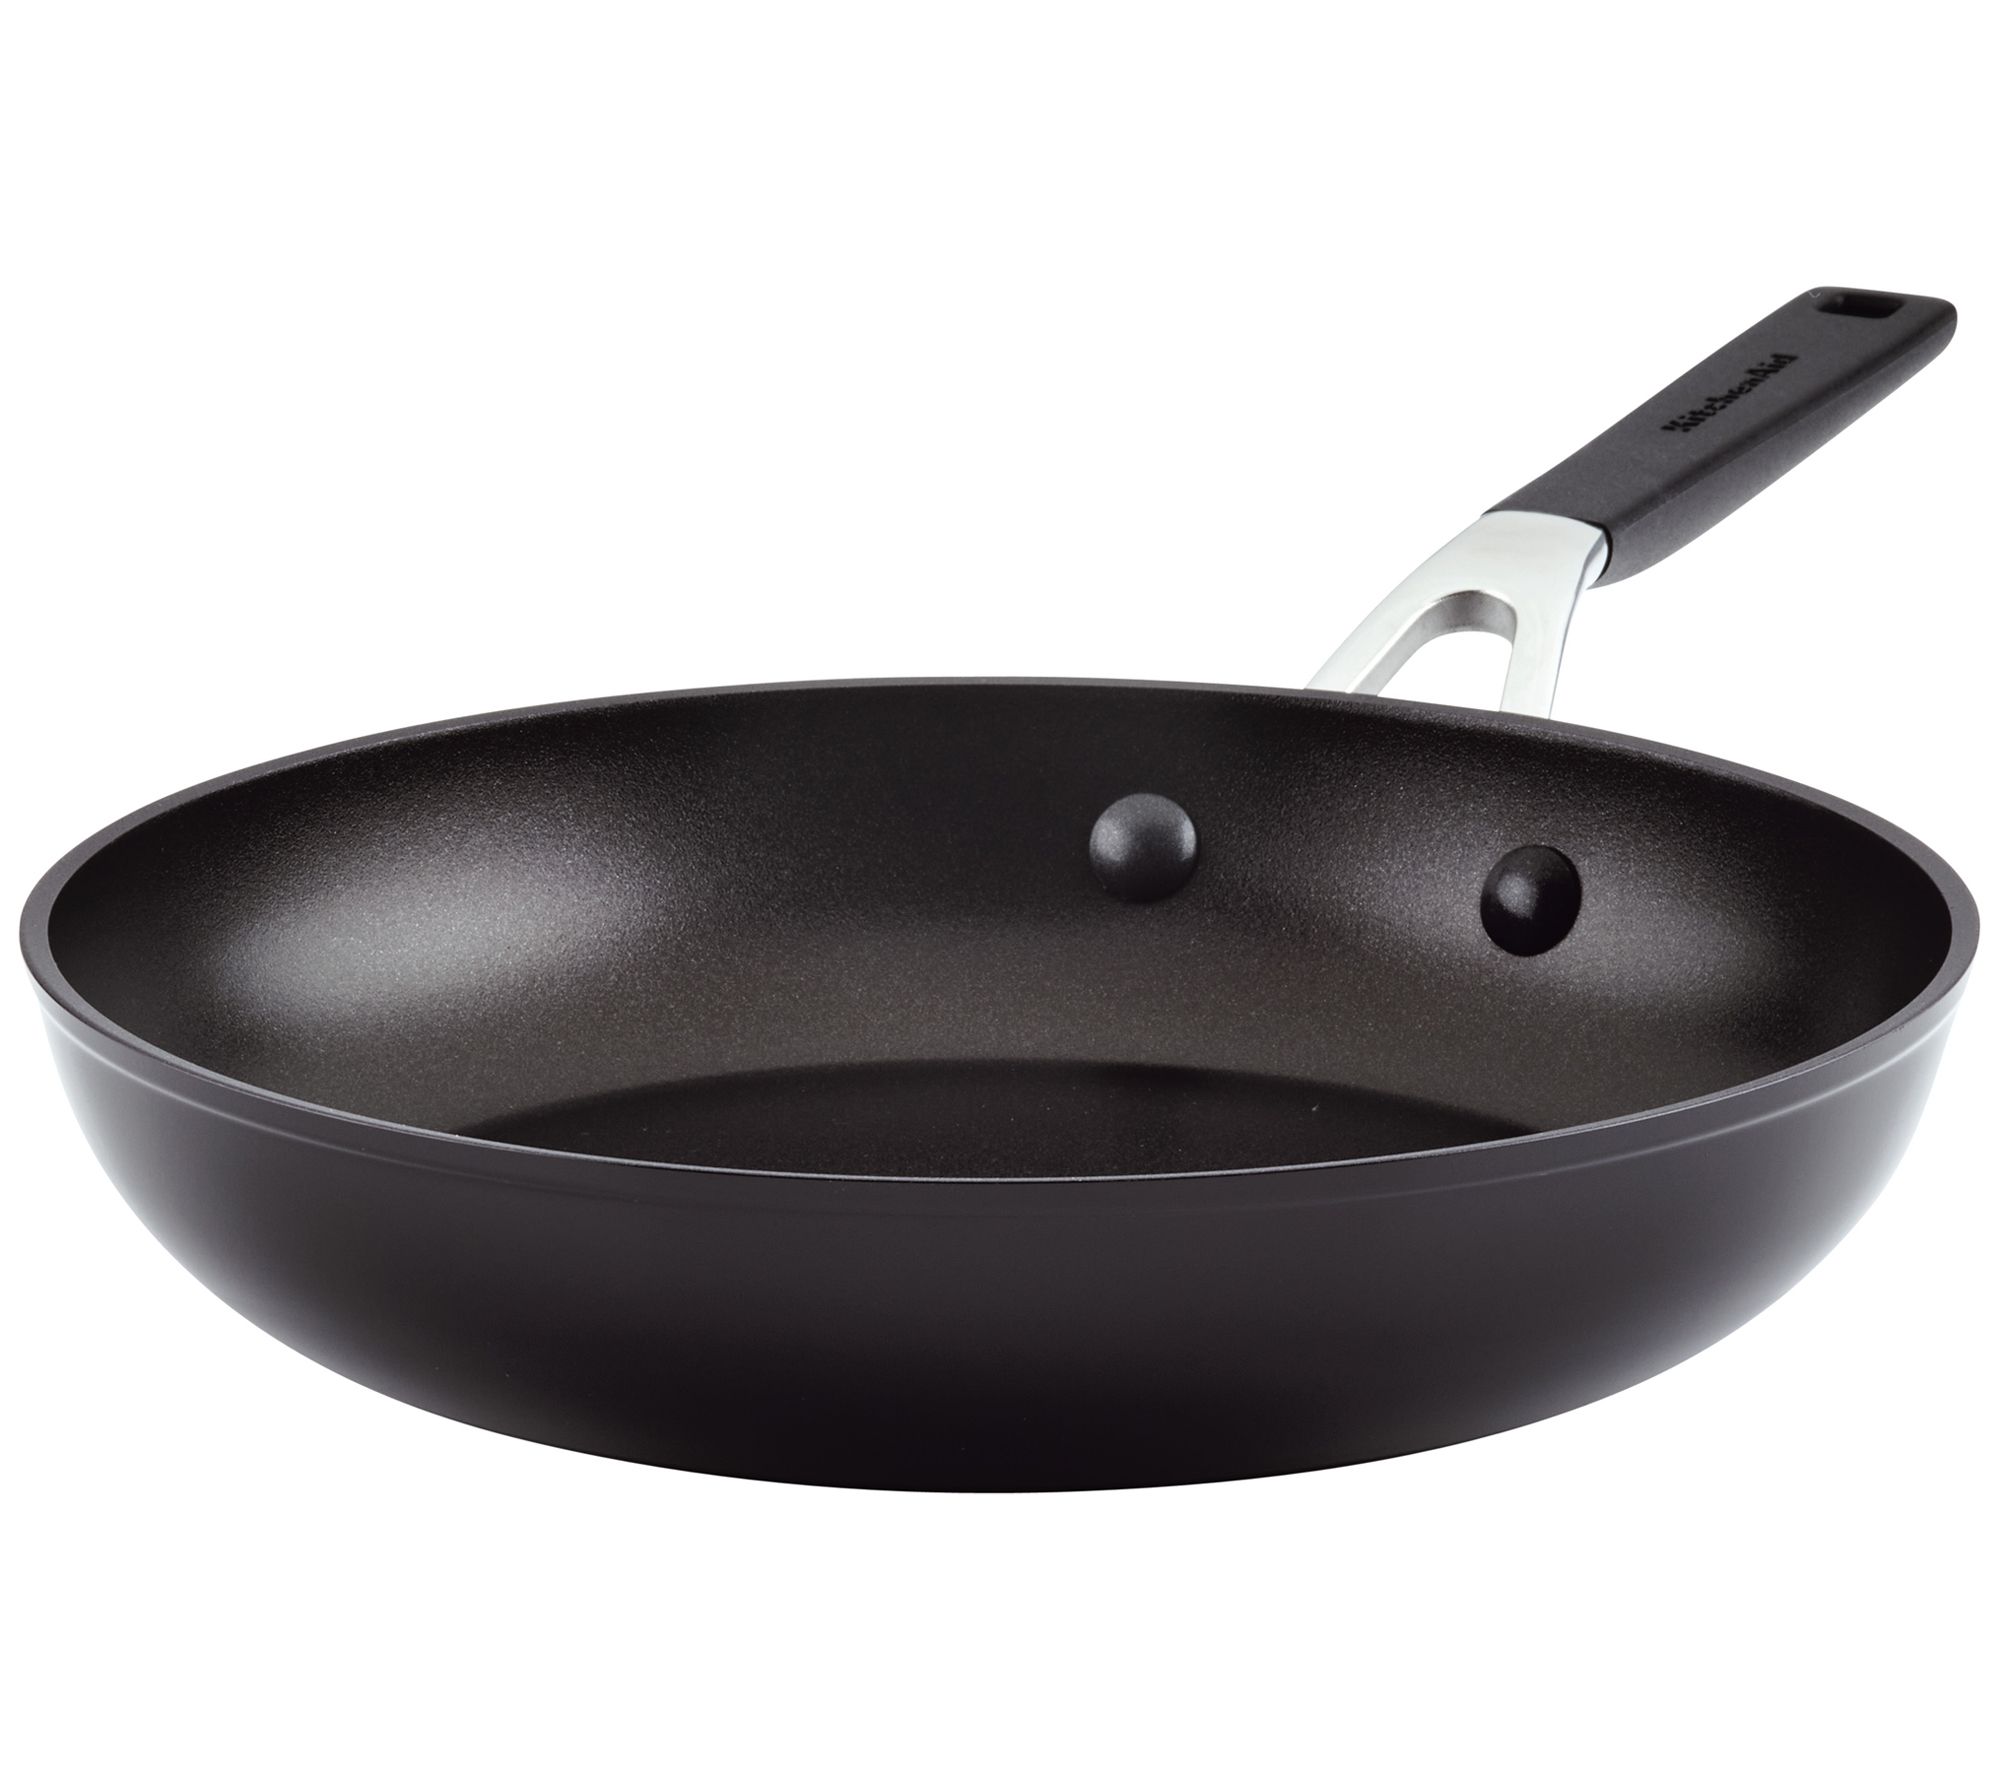 Cuisinart Chef's Classic Nonstick Hard Anodized 10in Skillet